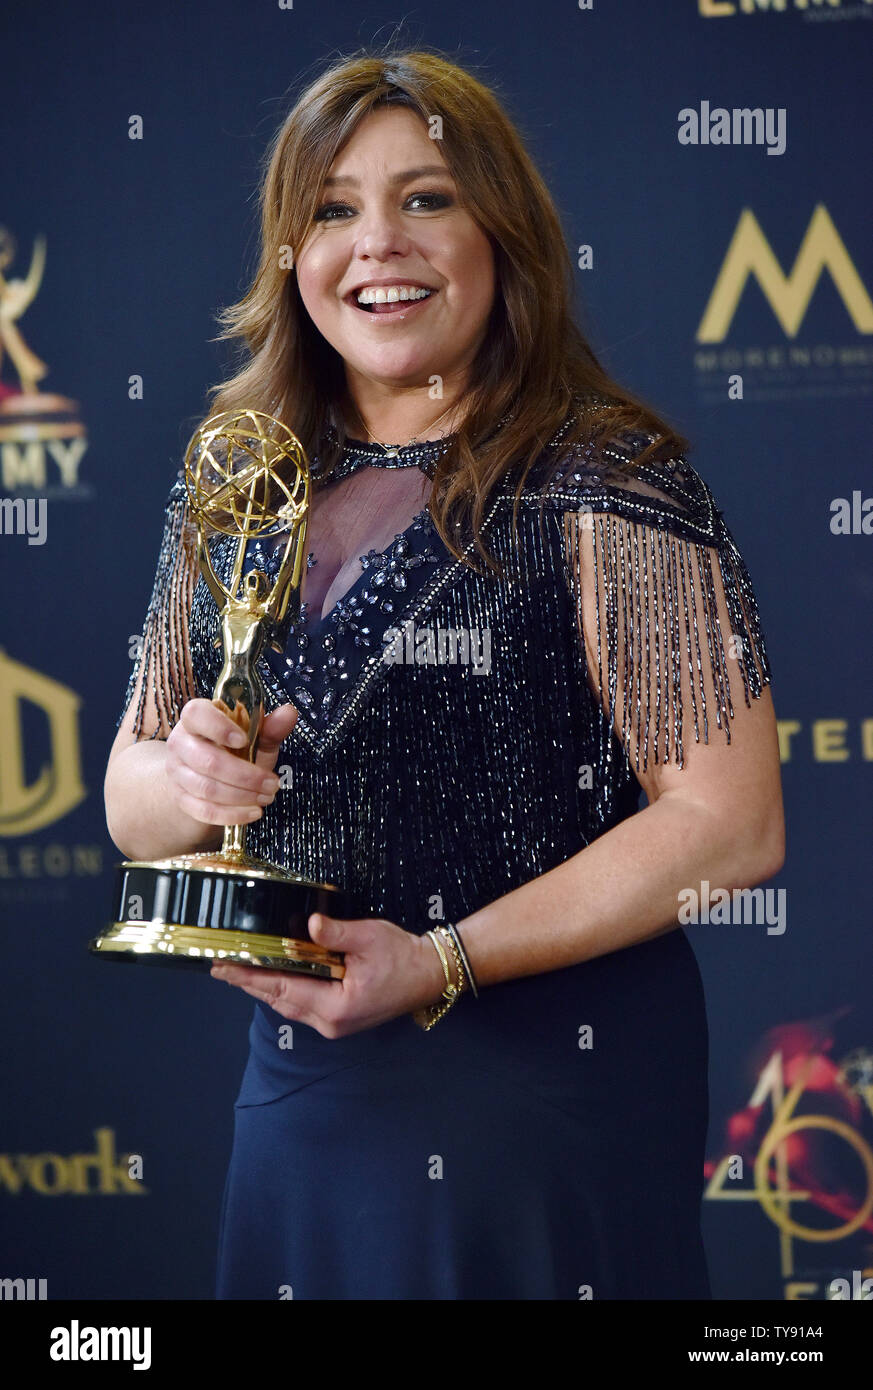 Rachael Ray holds her Daytime Emmy for Outstanding Informative Talk Show backstage in the press room at the 46th Annual Daytime Emmy Awards held at the Pasadena Civic Auditorium in Pasadena, California on May 5, 2019. Photo by Chris Chew/UPI Stock Photo